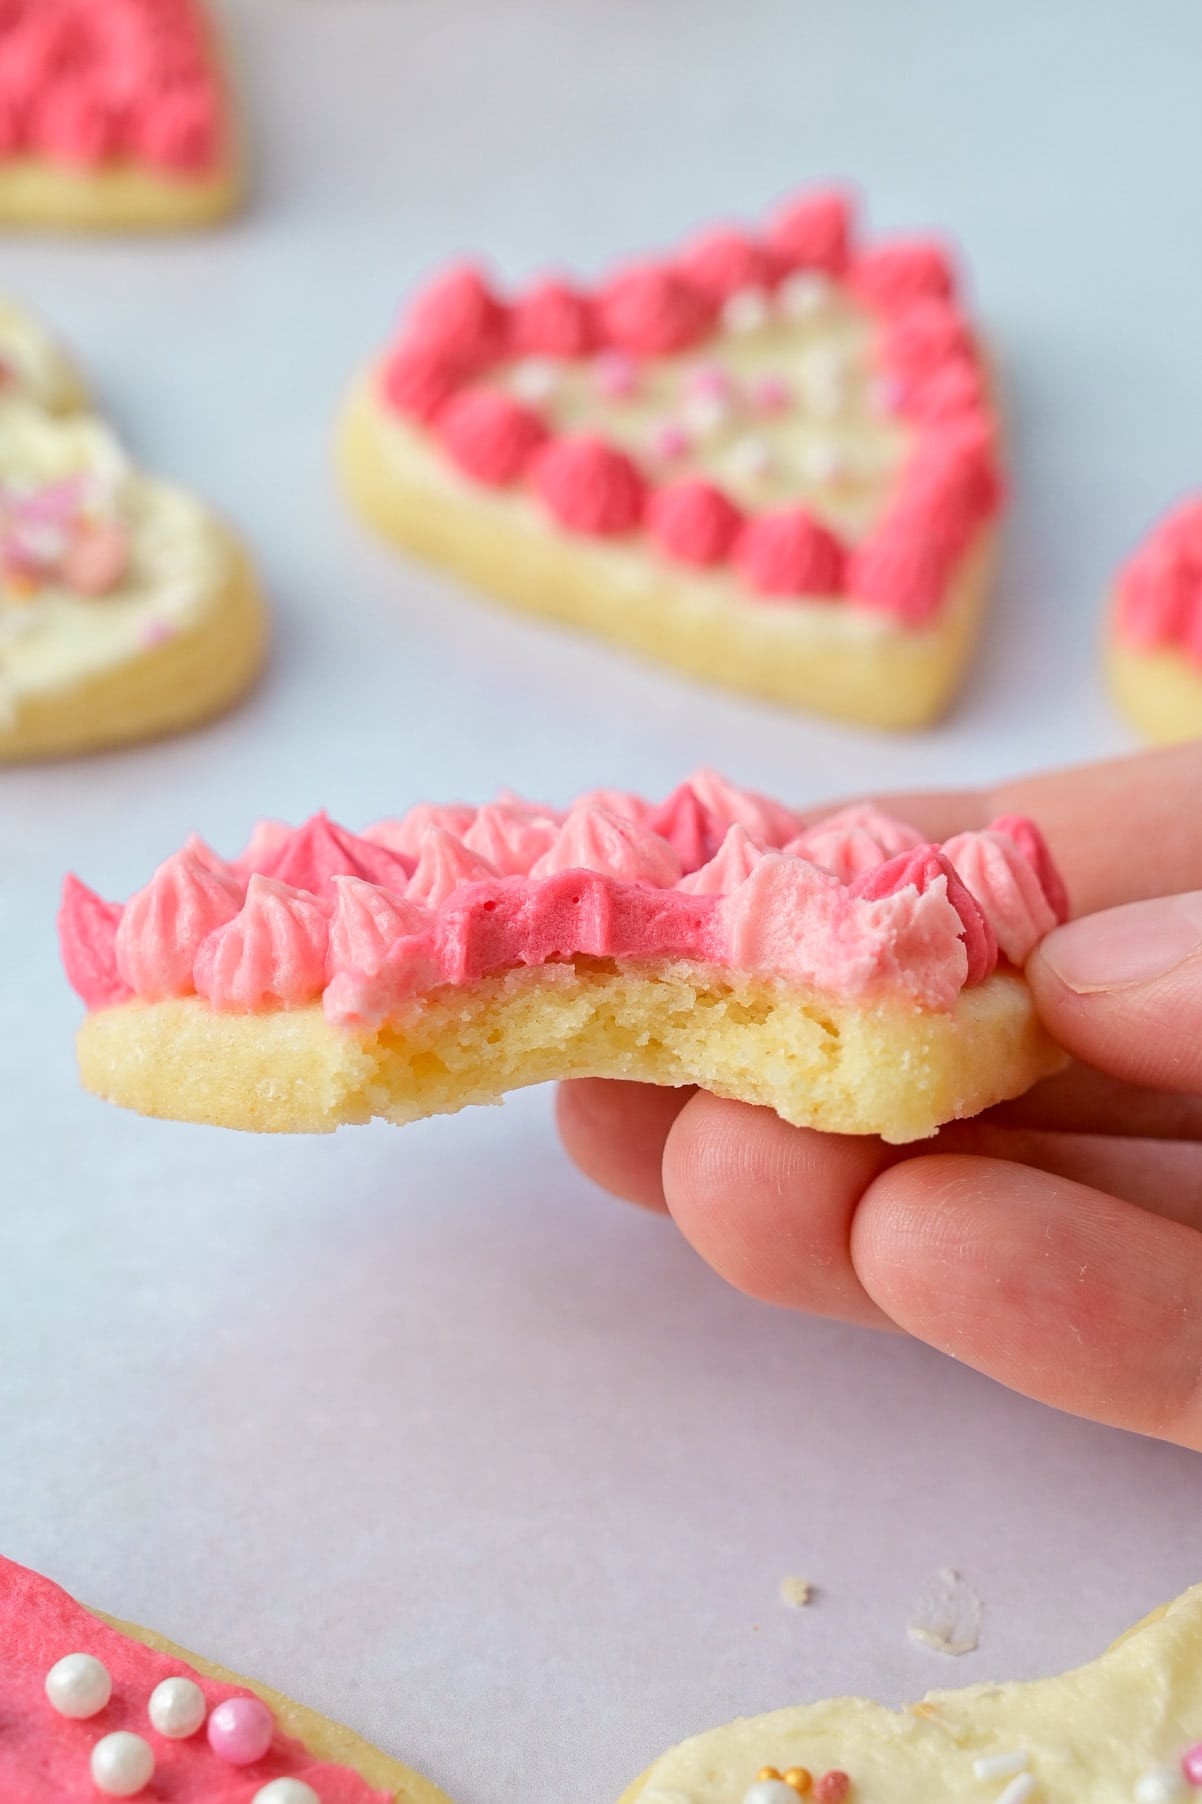 Heart cookie with frosting and a piece missing is being held in a hand.